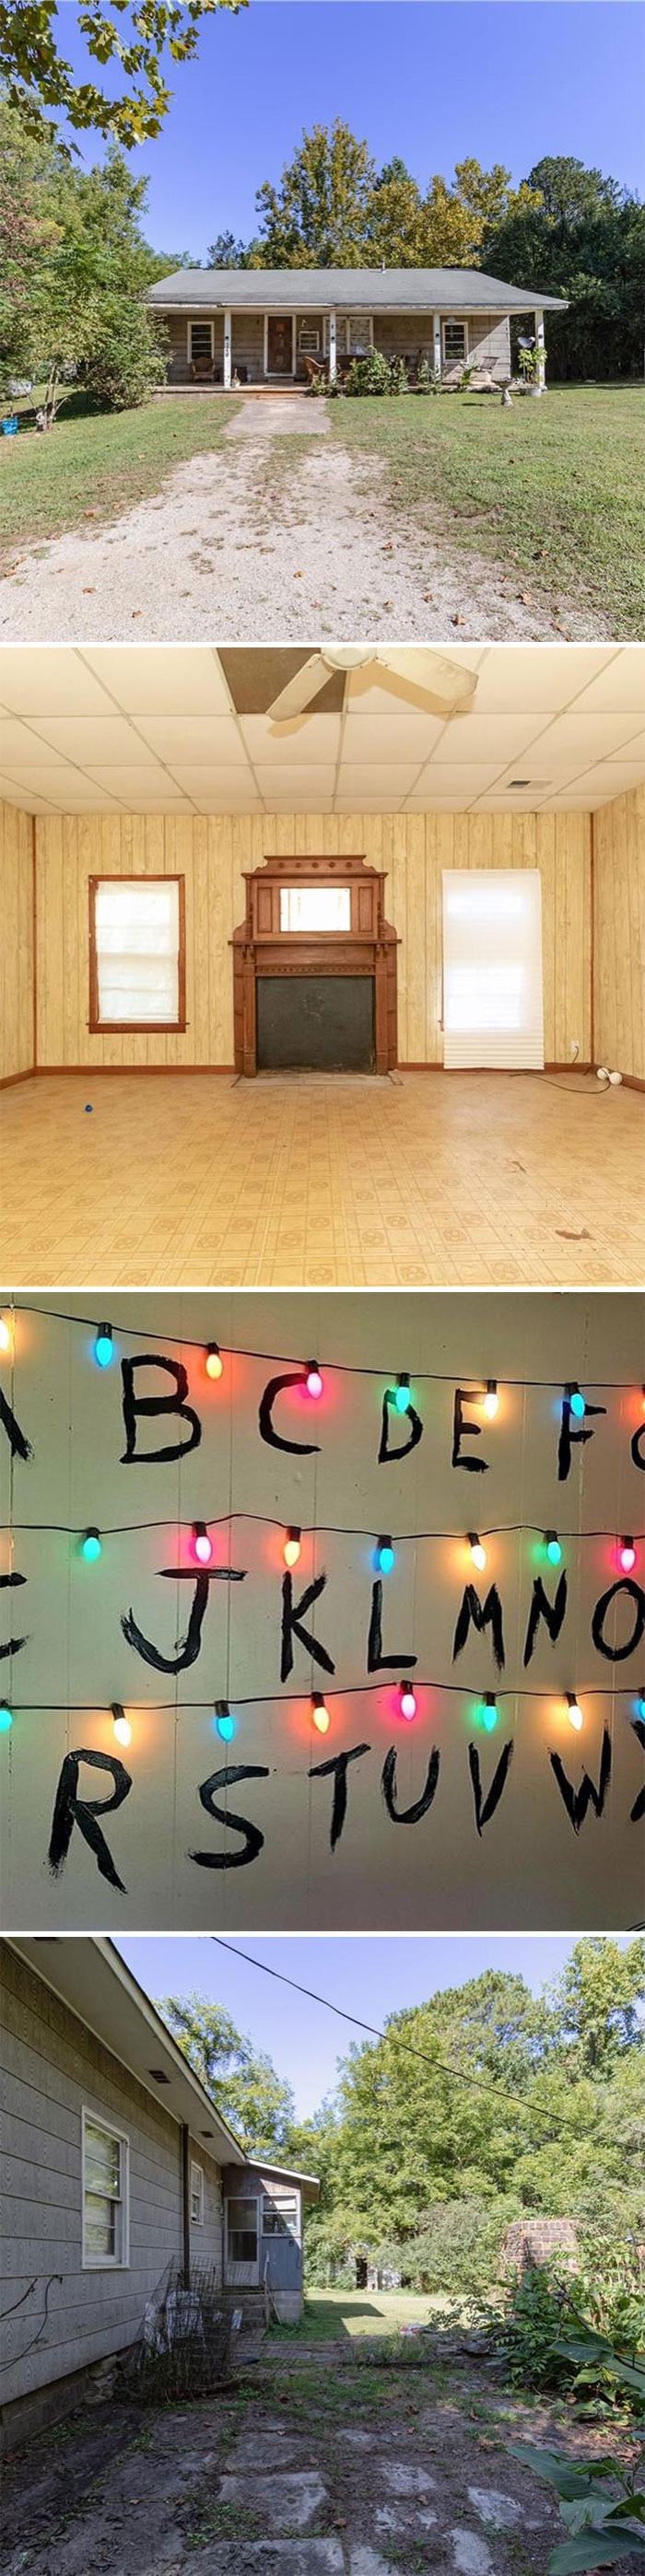 If You Like Stranger Things Today Is Your Day!!!! Because The Byers House Is For Sale. Currently Listed For $300,000 In Fayetteville, Ga. 3 Bd, 2 Ba. 1,846 Sq Ft. 6.17 Acres. Link In Bio For The Full Listing